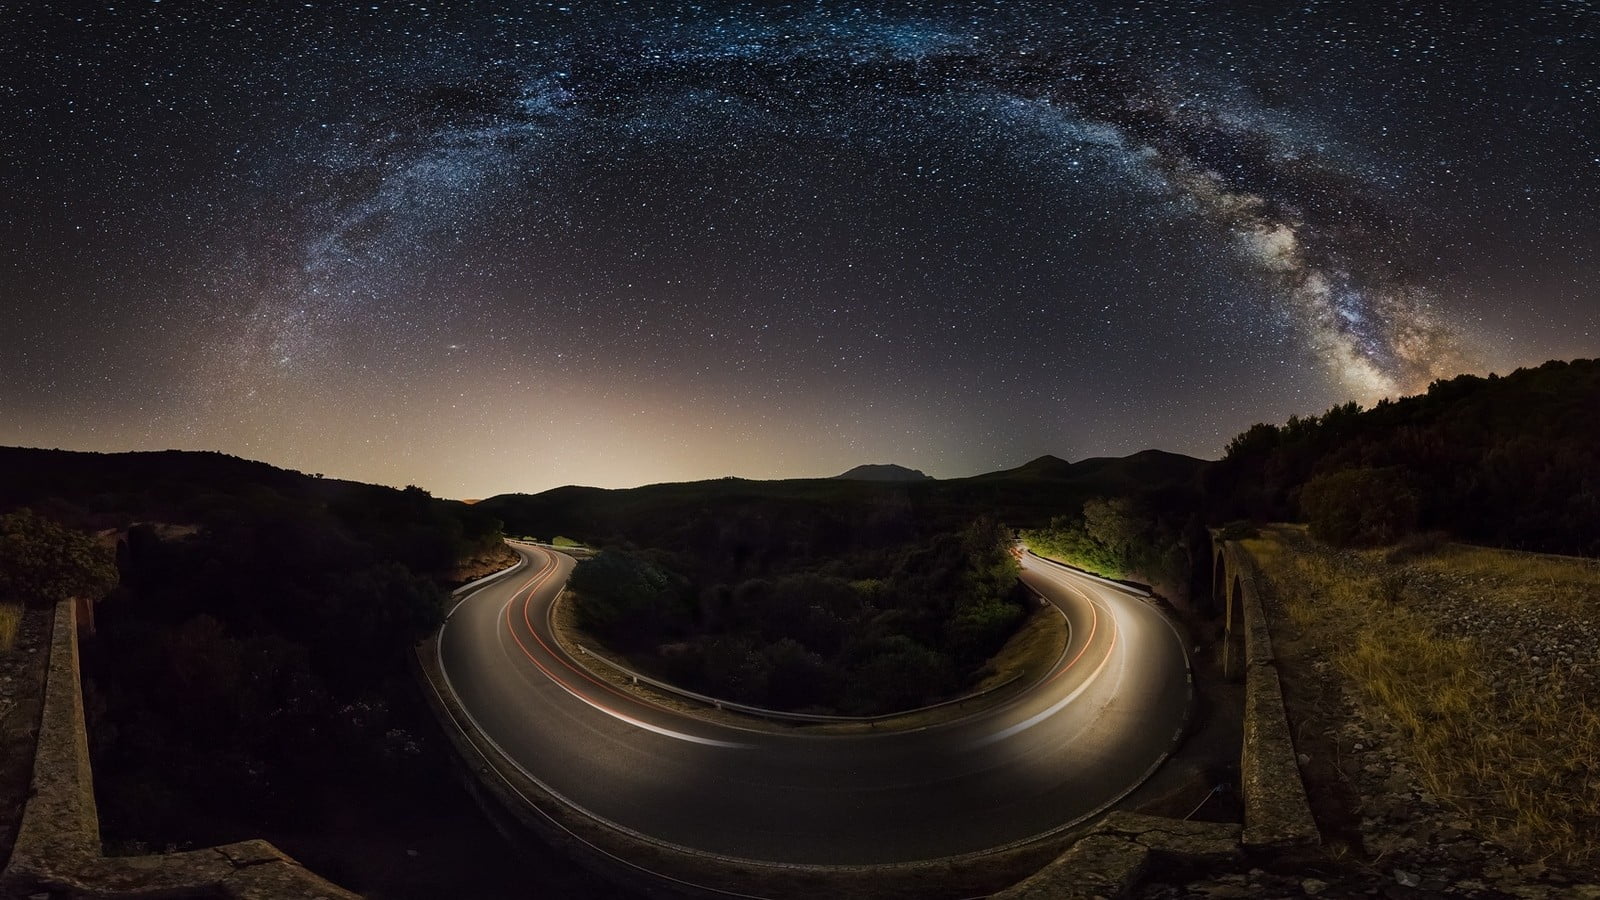 gray road between trees, nature, landscape, starry night, Milky Way